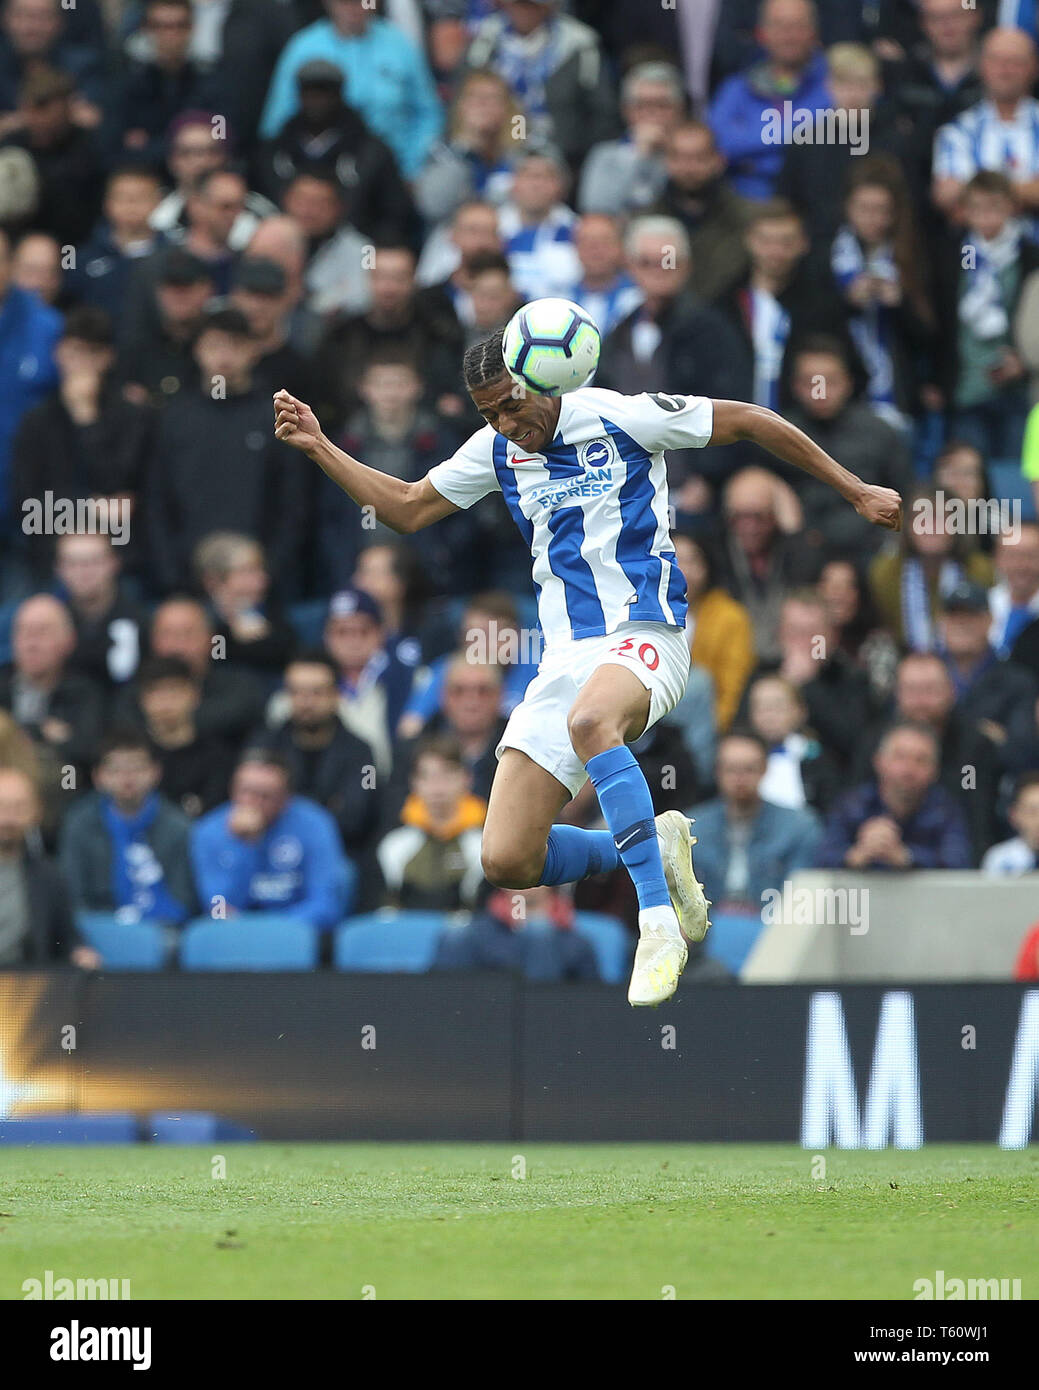 BRIGHTON, ENGLAND  27th April  Solly March of Brighton & Hove Albion in action during the Premier League match between Brighton and Hove Albion and Newcastle United at the American Express Community Stadium, Brighton and Hove on Saturday 27th April 2019. (Credit: Mark Fletcher | MI News)  Editorial use only, license required for commercial use. Photograph may only be used for newspaper and/or magazine editorial purposes. Stock Photo